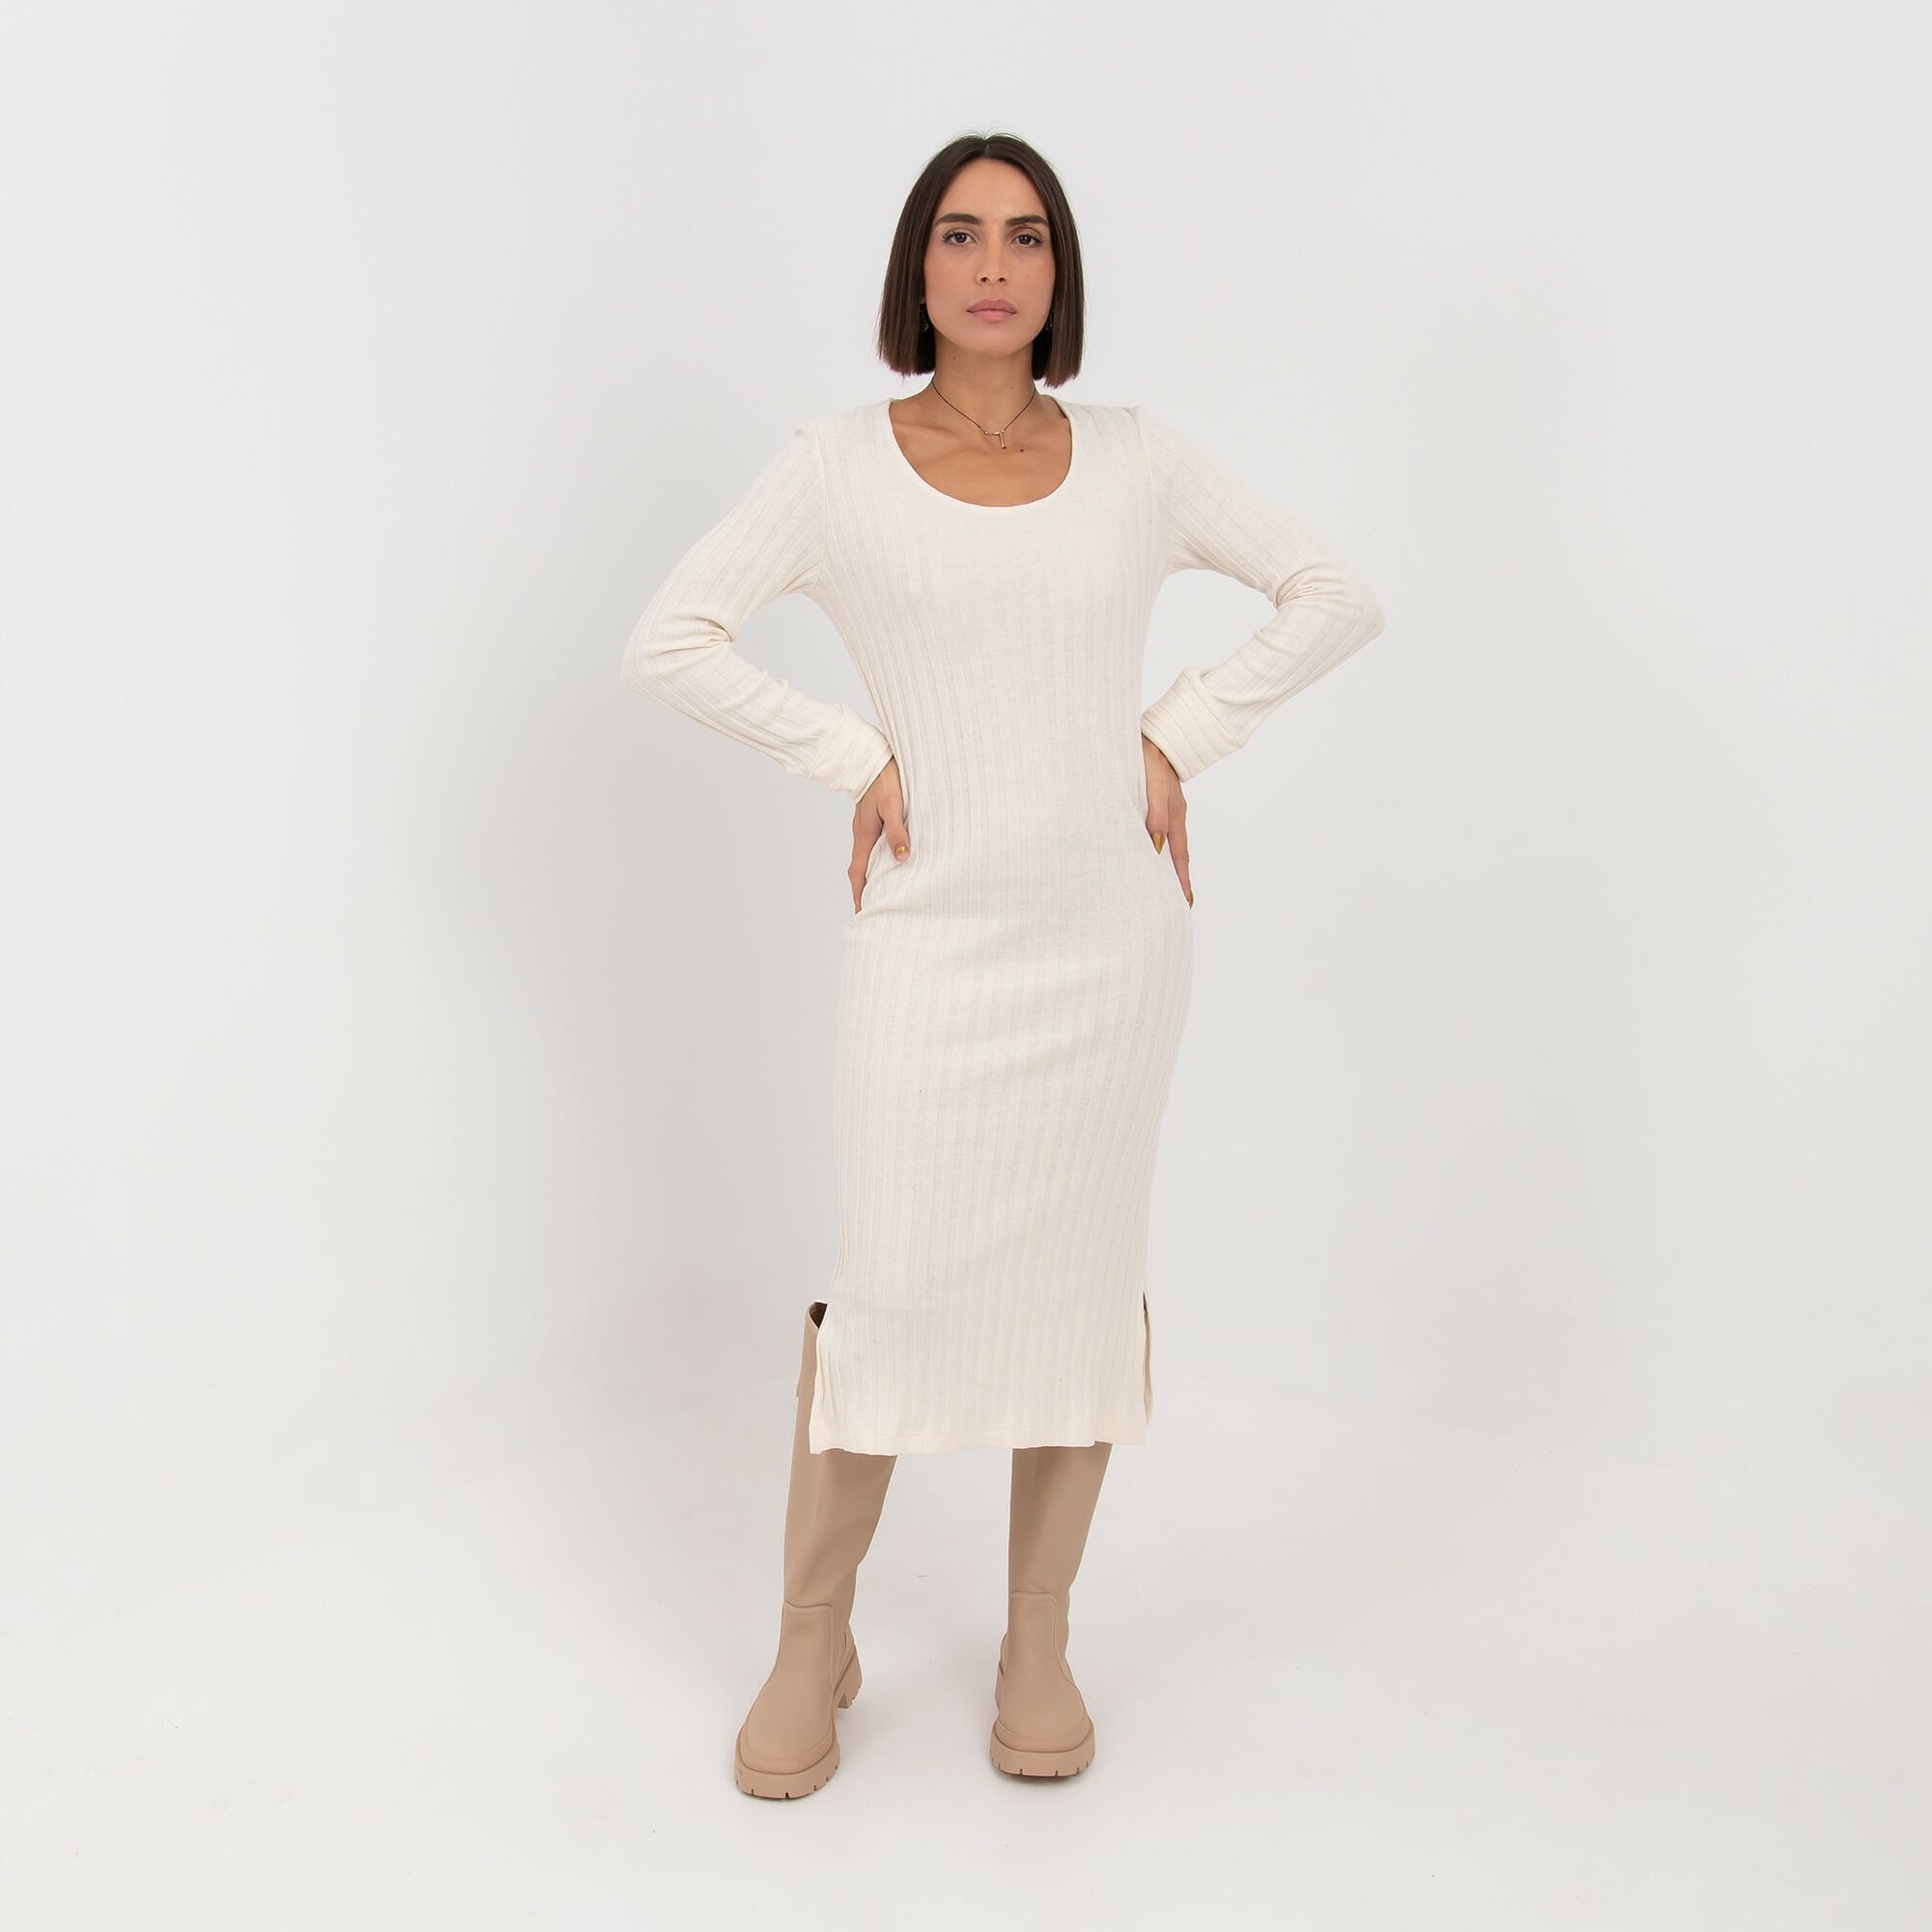 LOTUS EATERS MIDI DRESS WITH WIDE NECKLINE